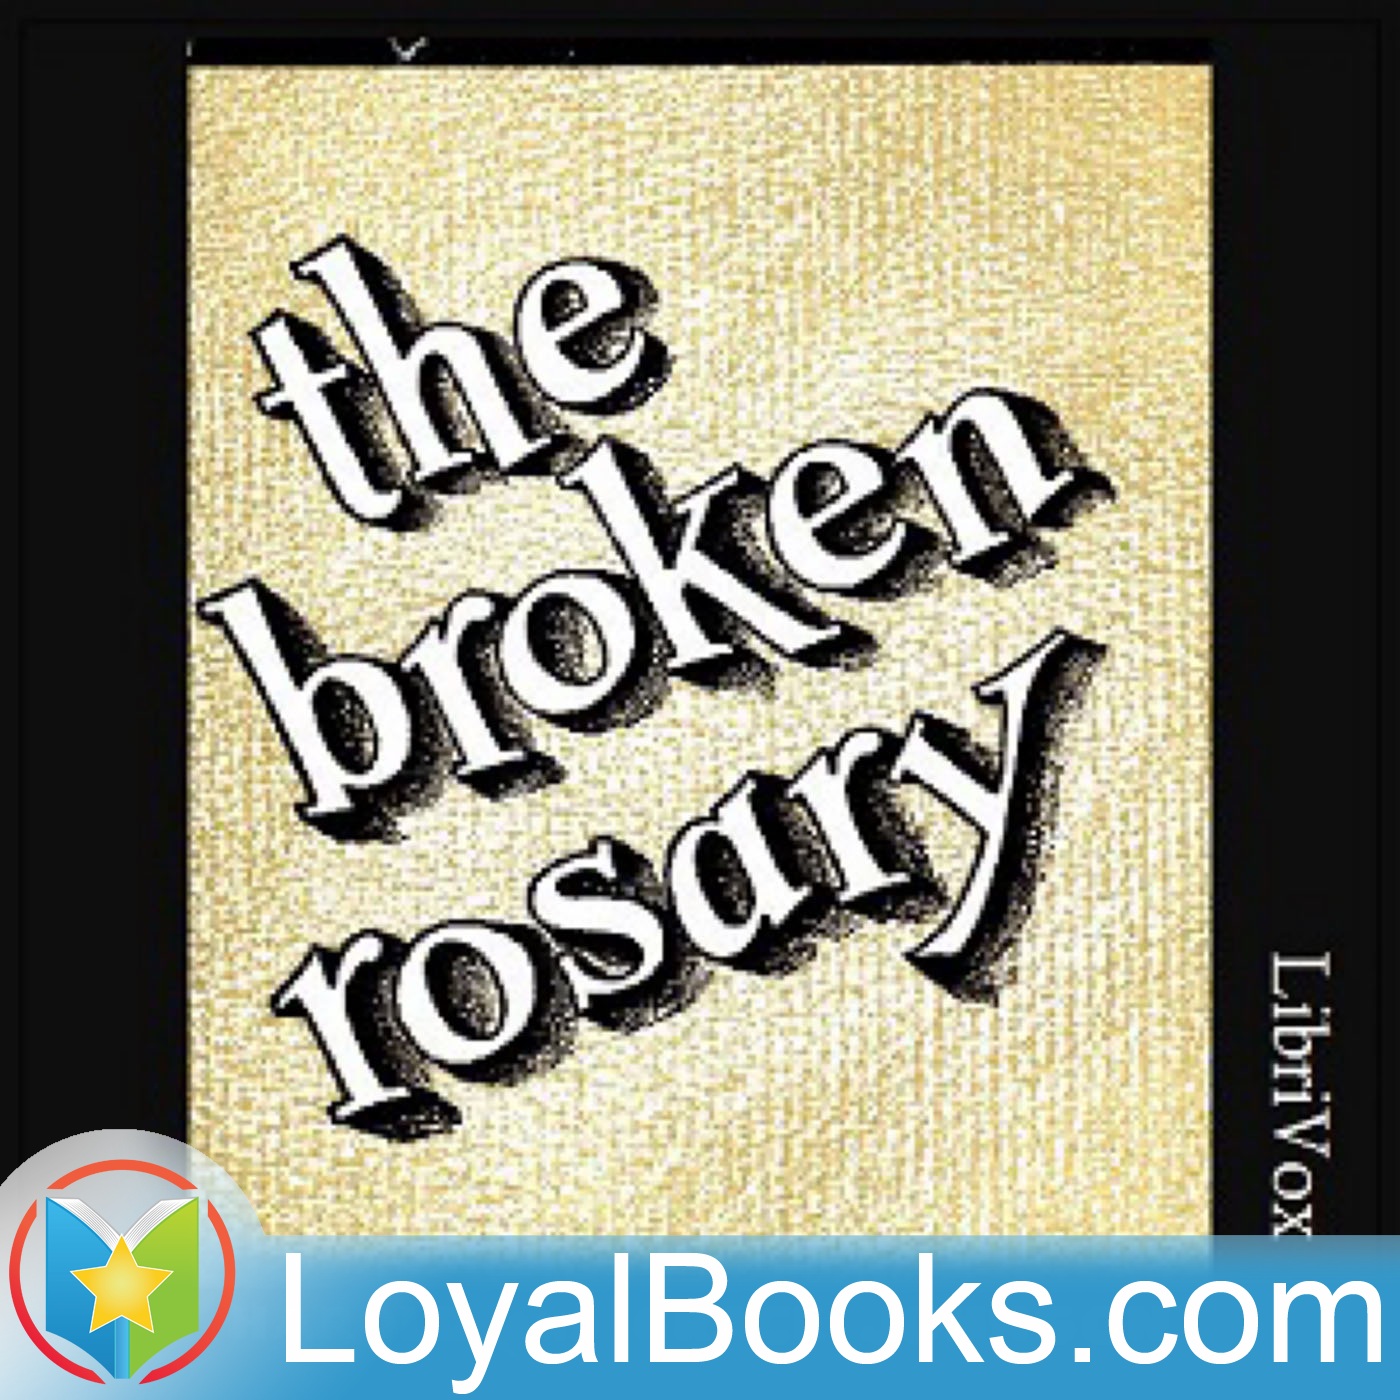 The Broken Rosary by Grace and Harold Johnson